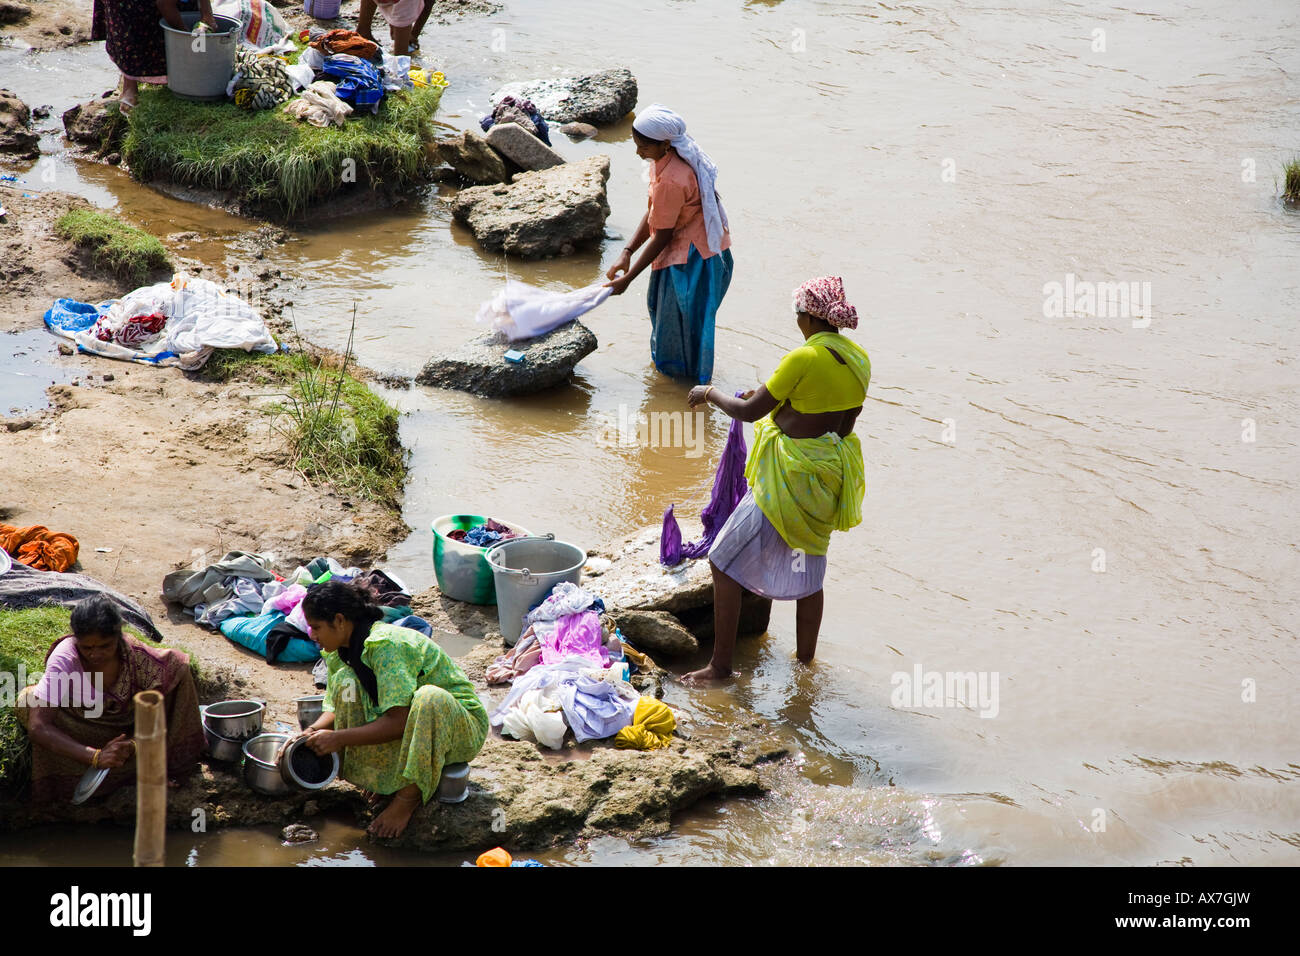 Women washing clothes in a river, Tamil Nadu, India Stock Photo